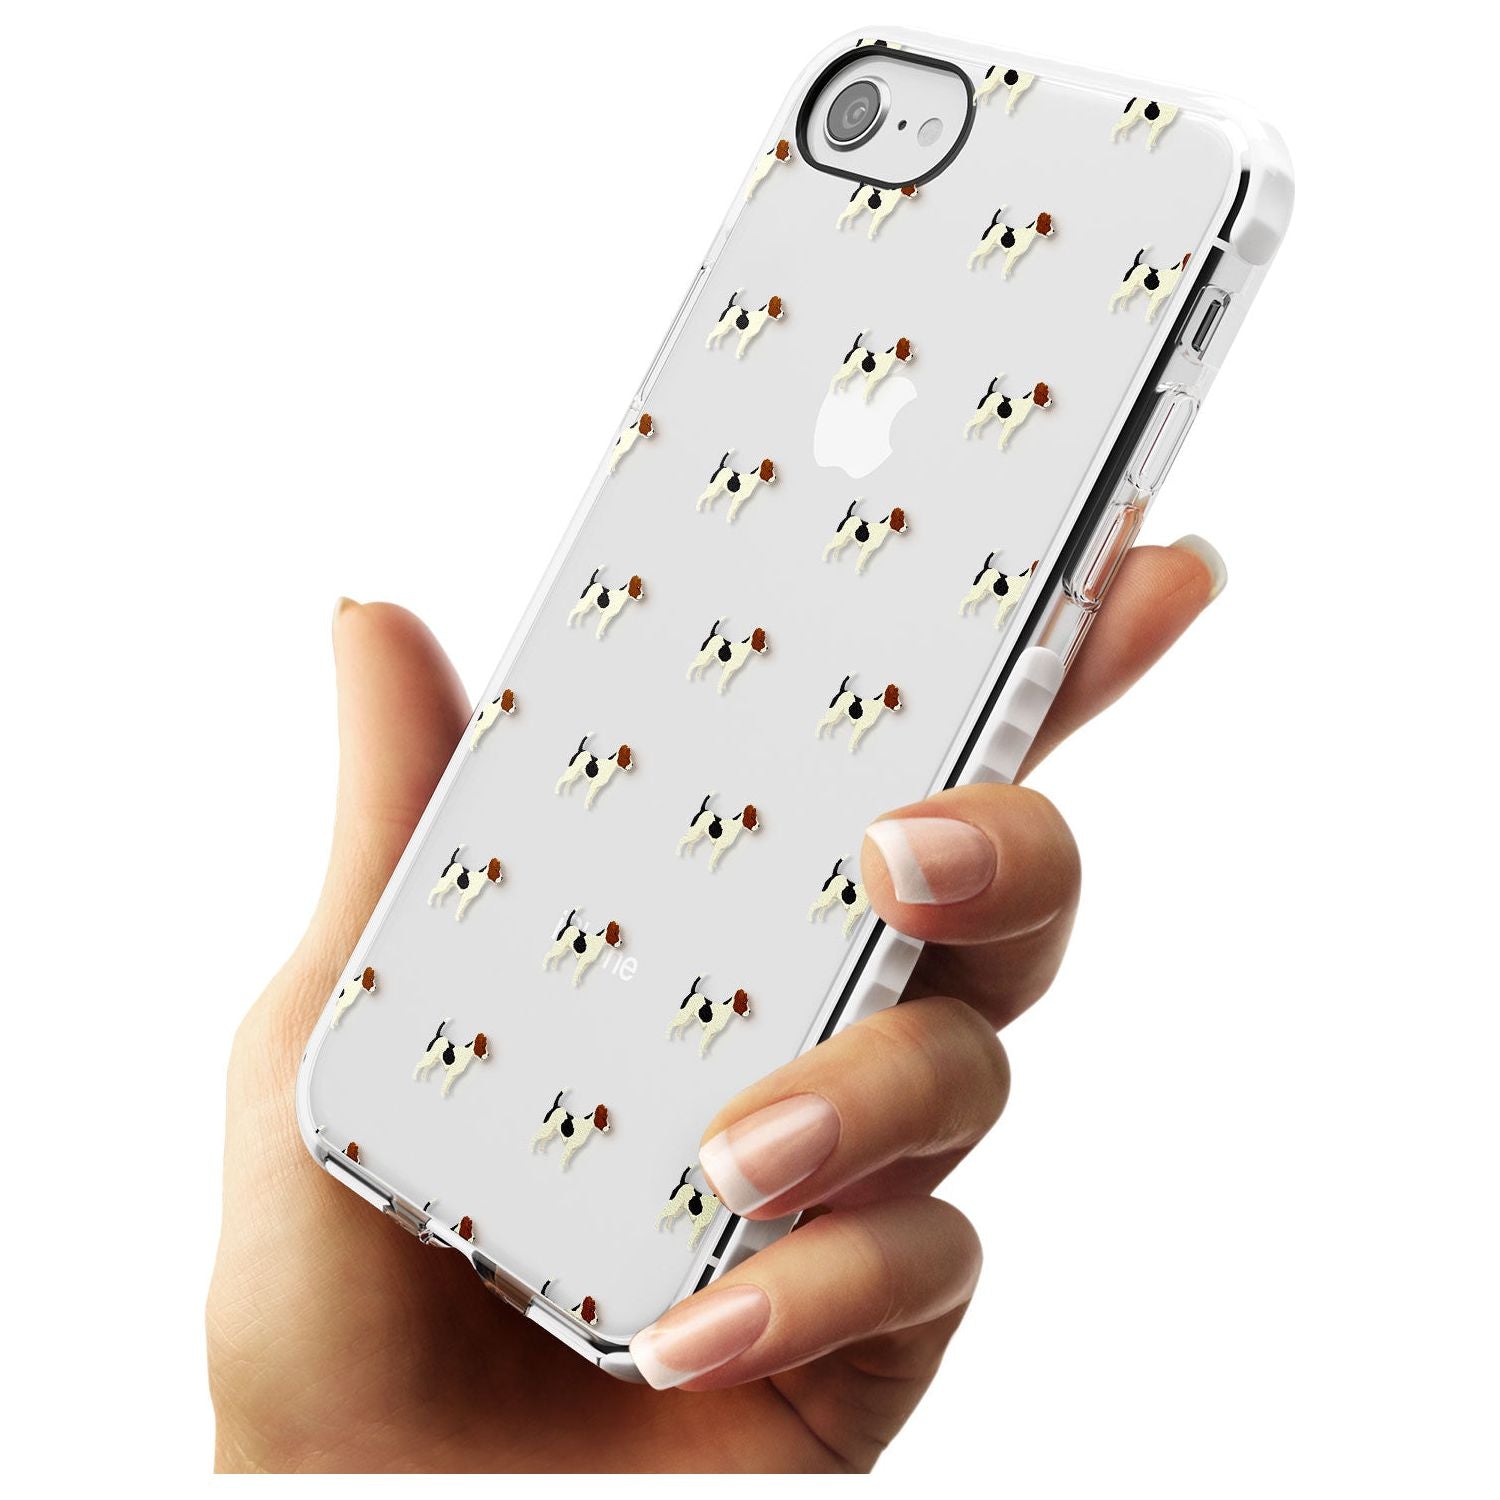 Jack Russell Terrier Dog Pattern Clear Impact Phone Case for iPhone SE 8 7 Plus